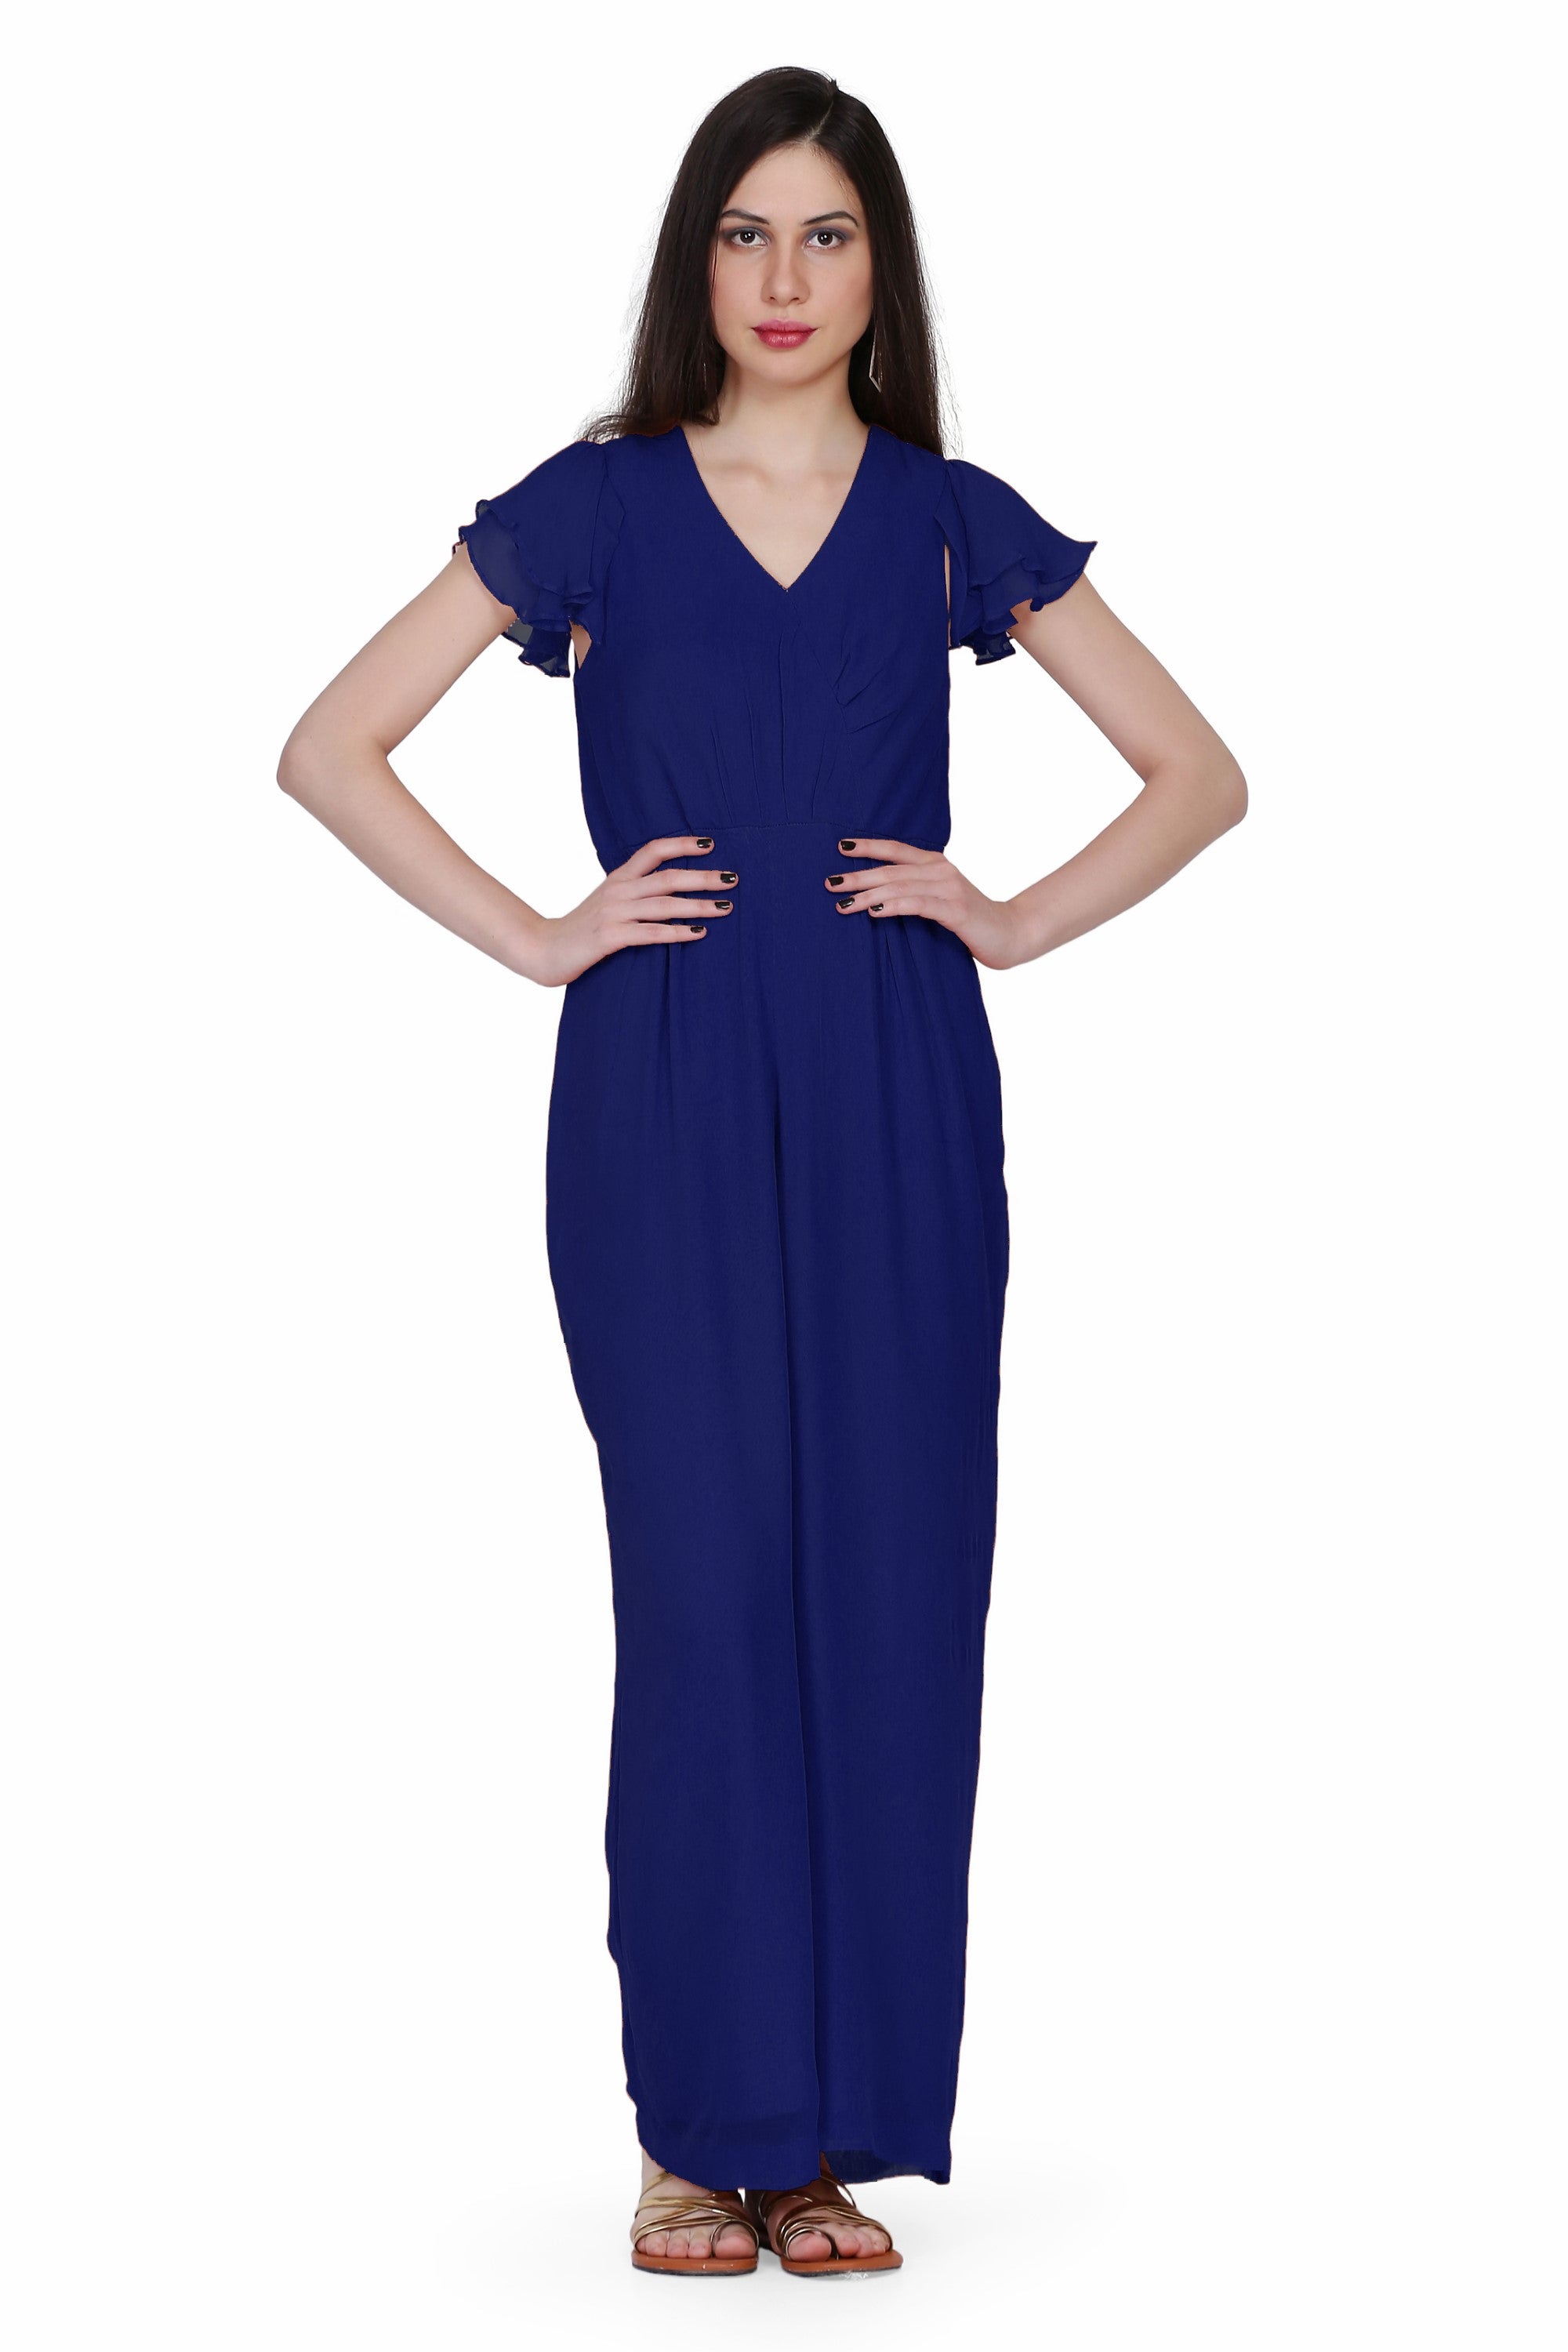 Women's Drape Party/ Casual Jumpsuit In Dark Blue - MIRACOLOS by Ruchi